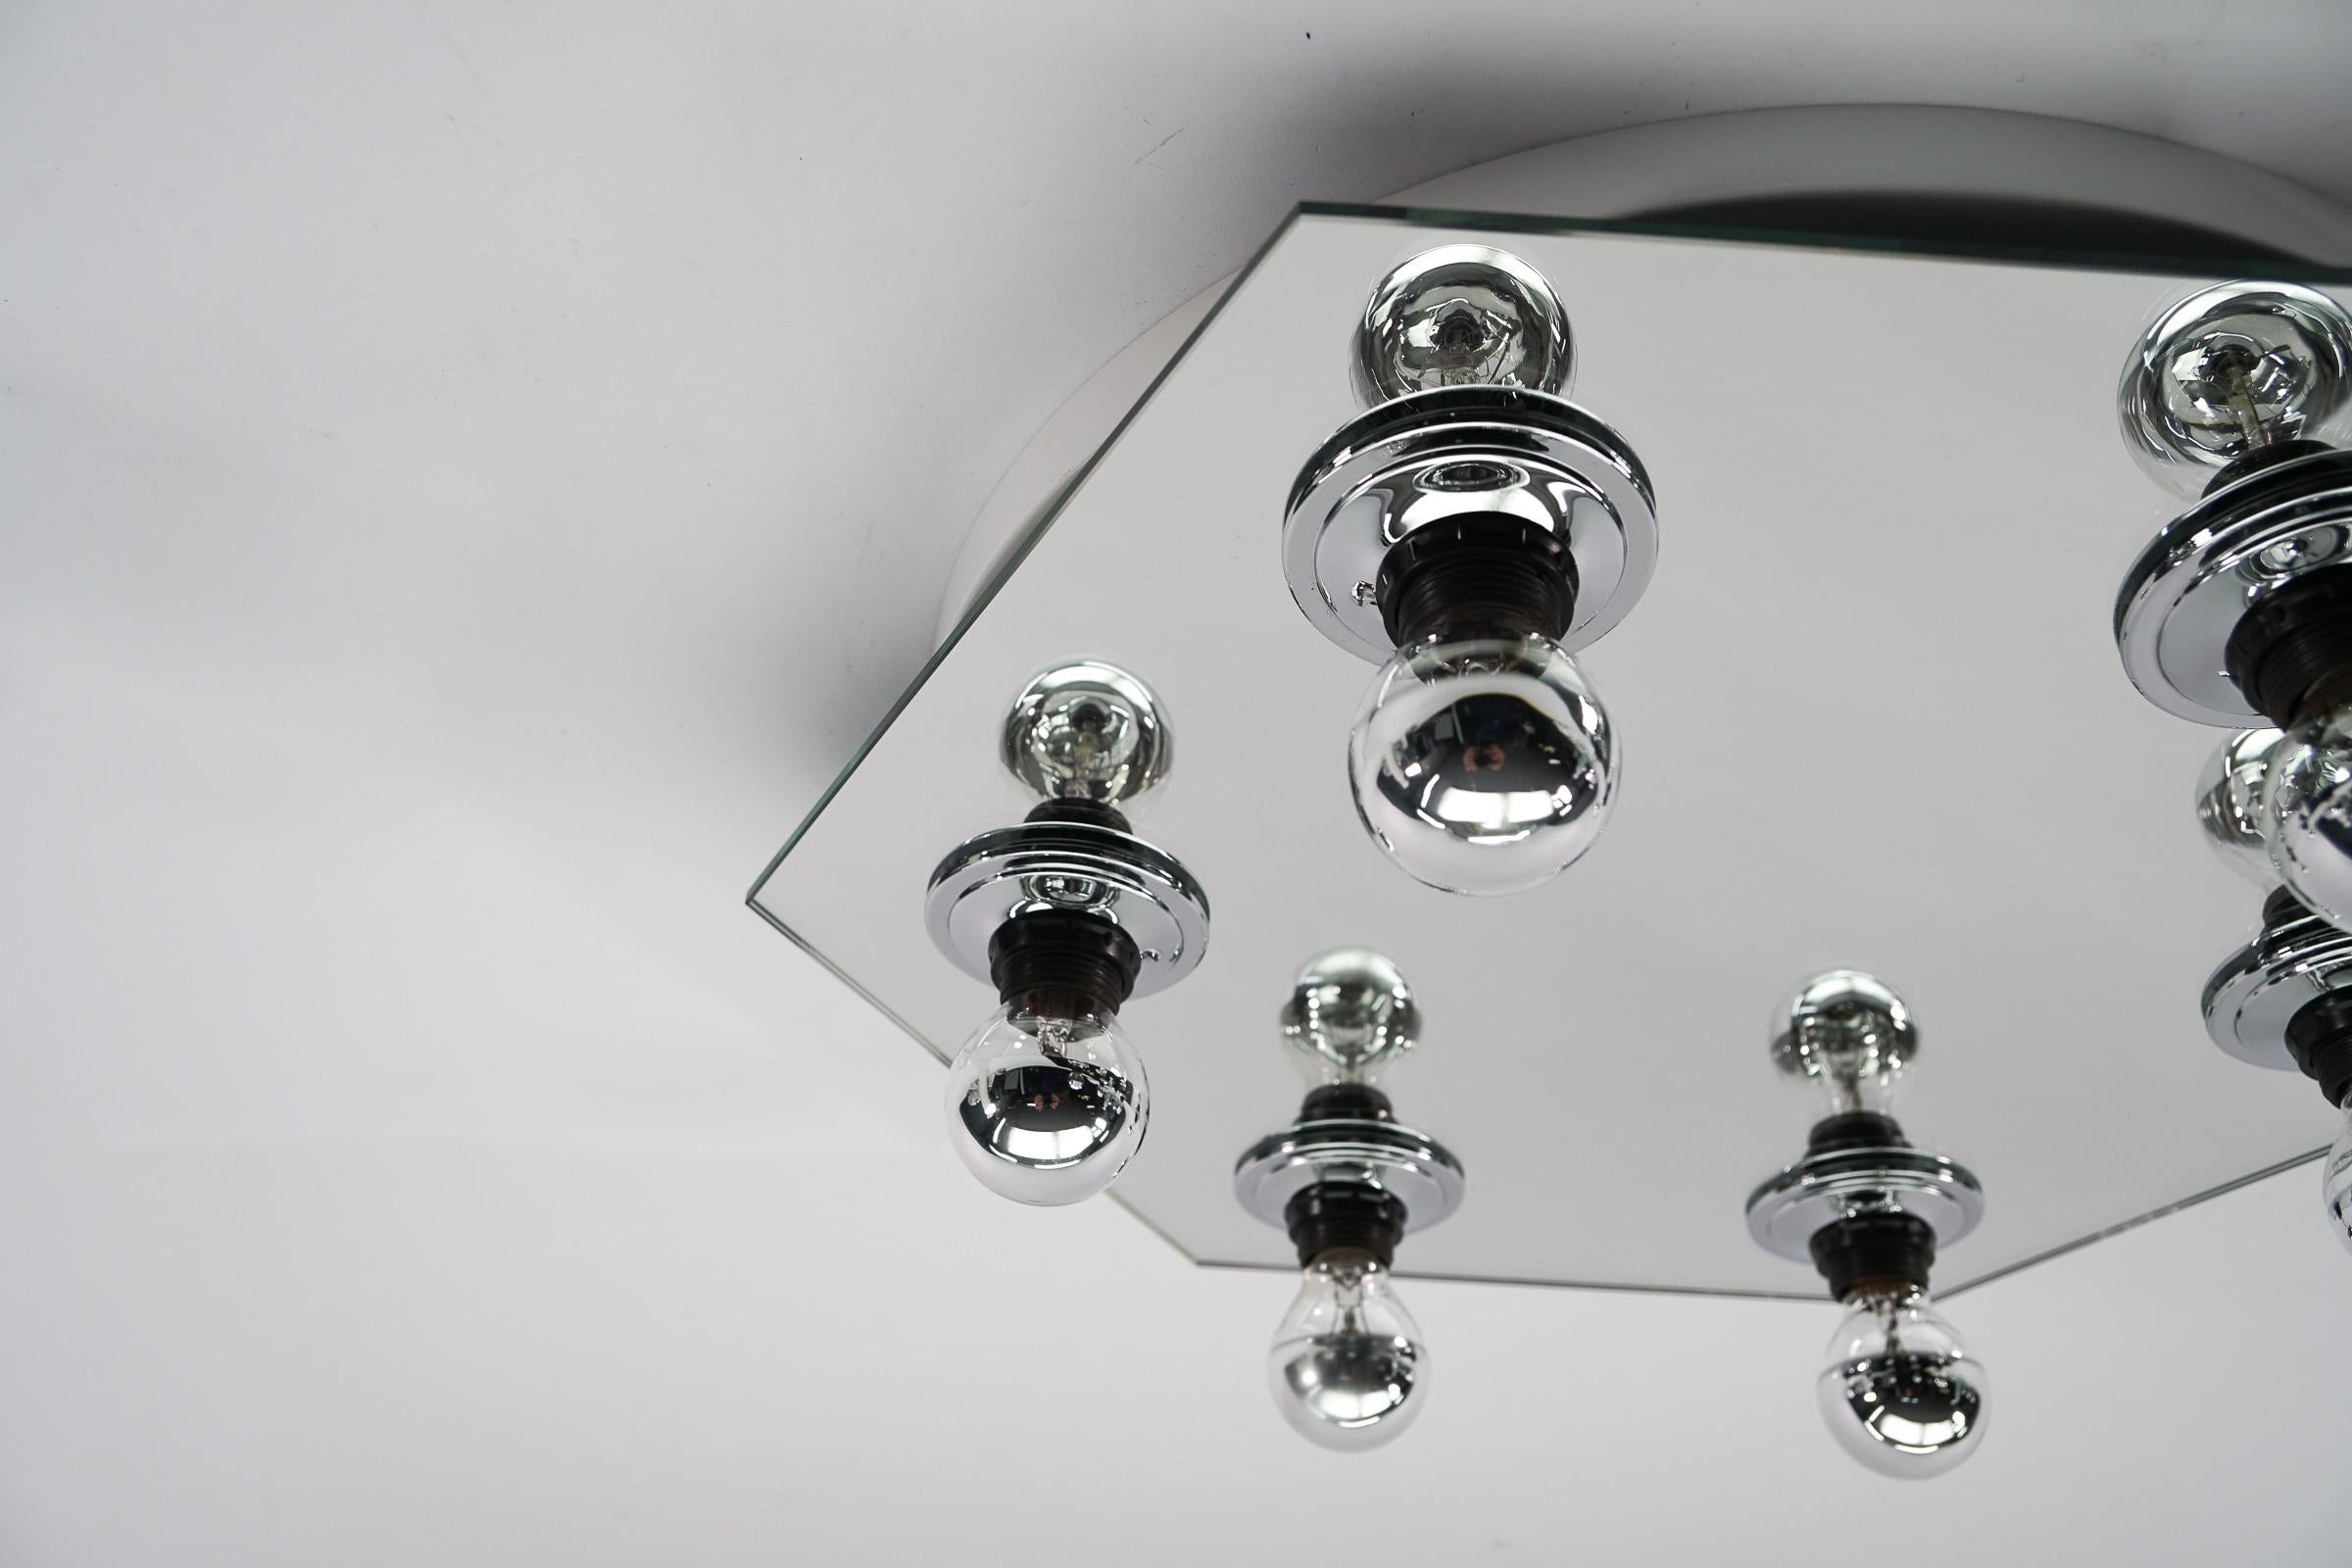 Hexagonal Mirrored Ceiling Lamp With Six Light Bulbs, 1970s Italy For Sale 4